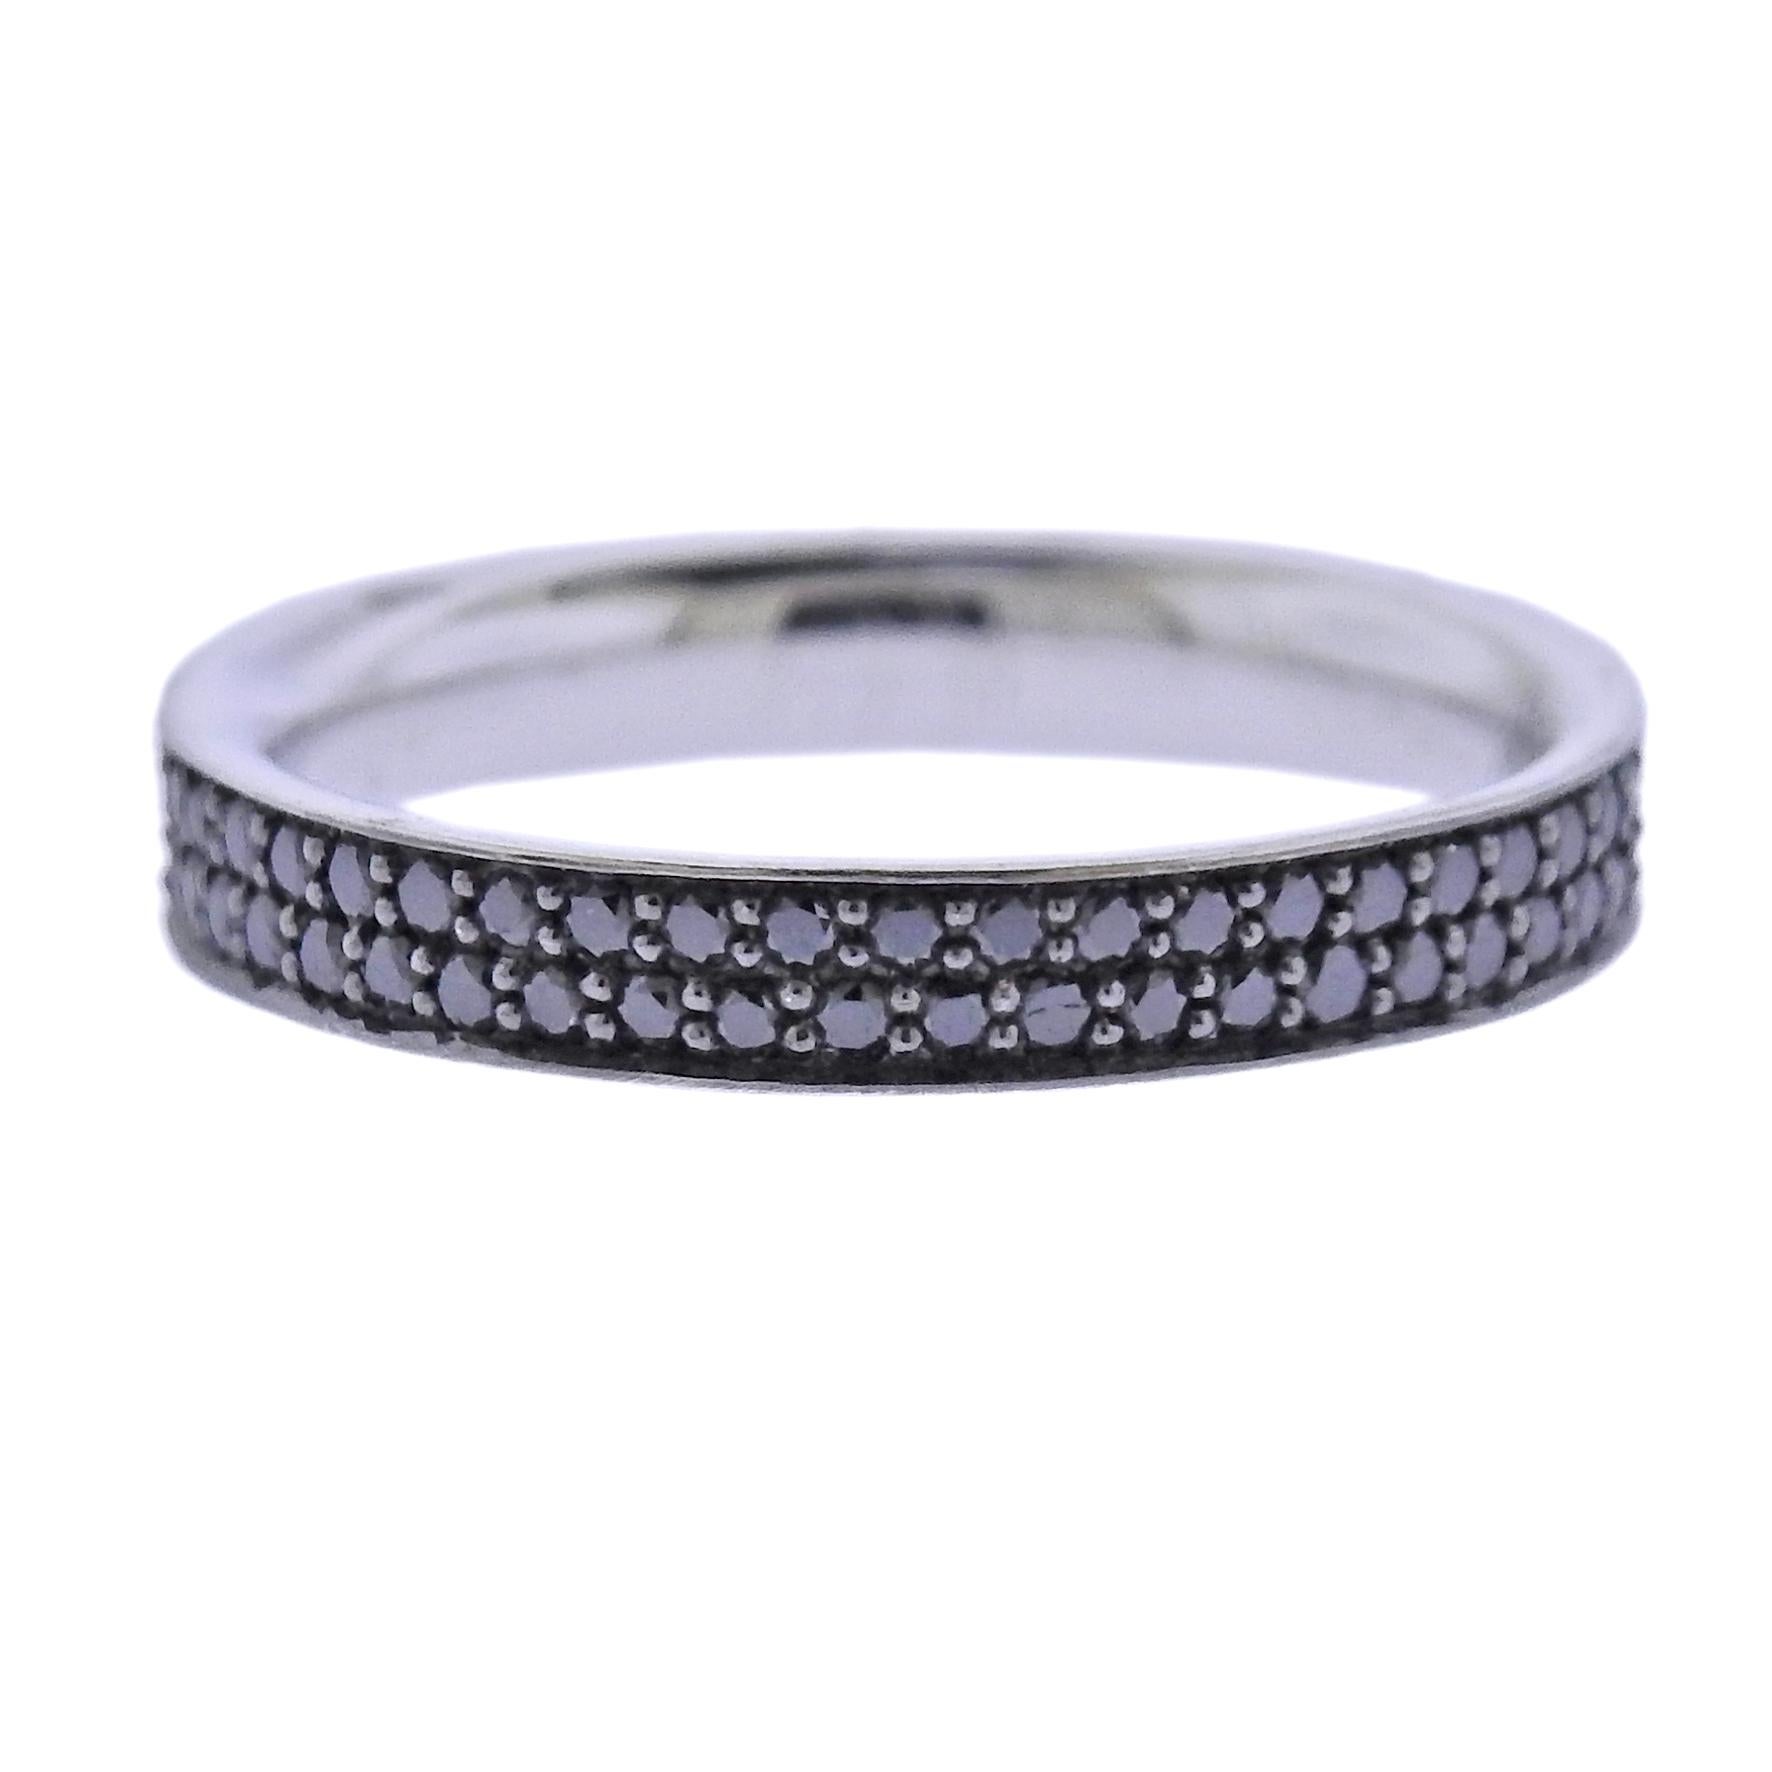 Brand new Georg Jensen 18k white gold double row diamond band ring set with 0.54ctw of black diamonds. Ring measures 3mm wide and available in size 51. Model# 3571000. Marked: GJ, 750, ring size, 1513 B. Weight is 2.8 grams.